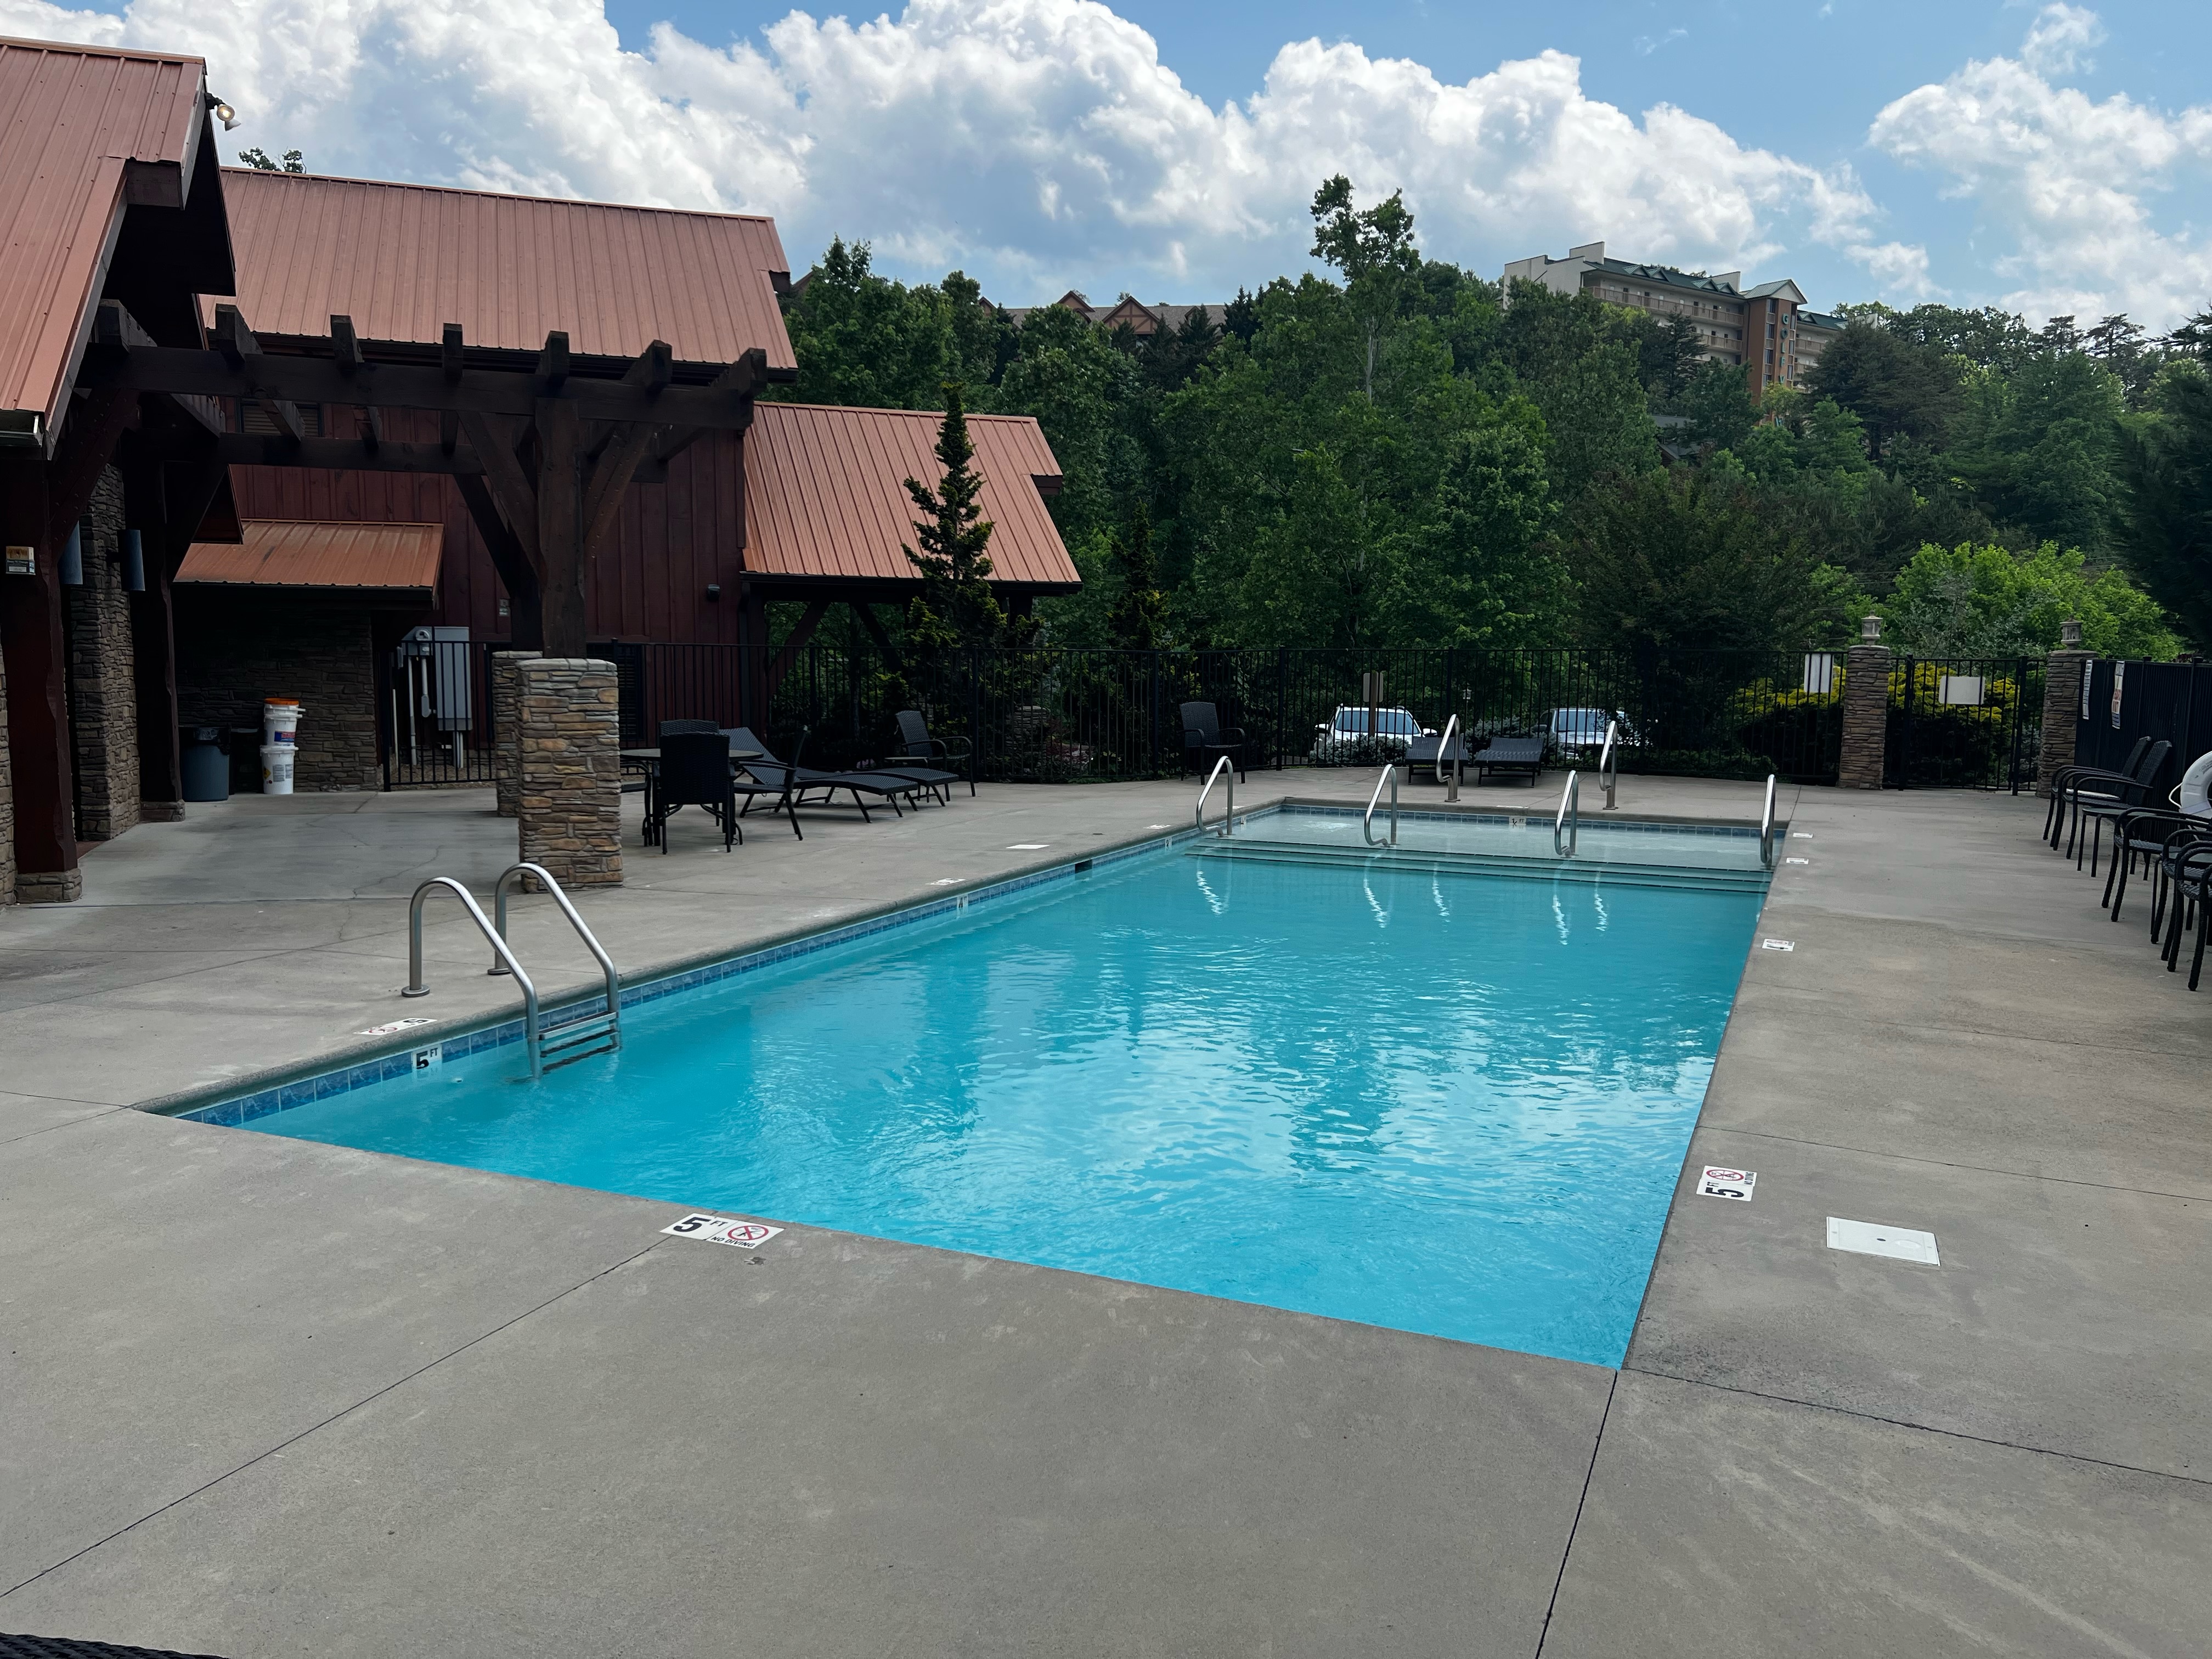 Neighborhood outdoor pool available for your use (seasonal). Book your Spring/Summer vacation at Bear Cove Falls!